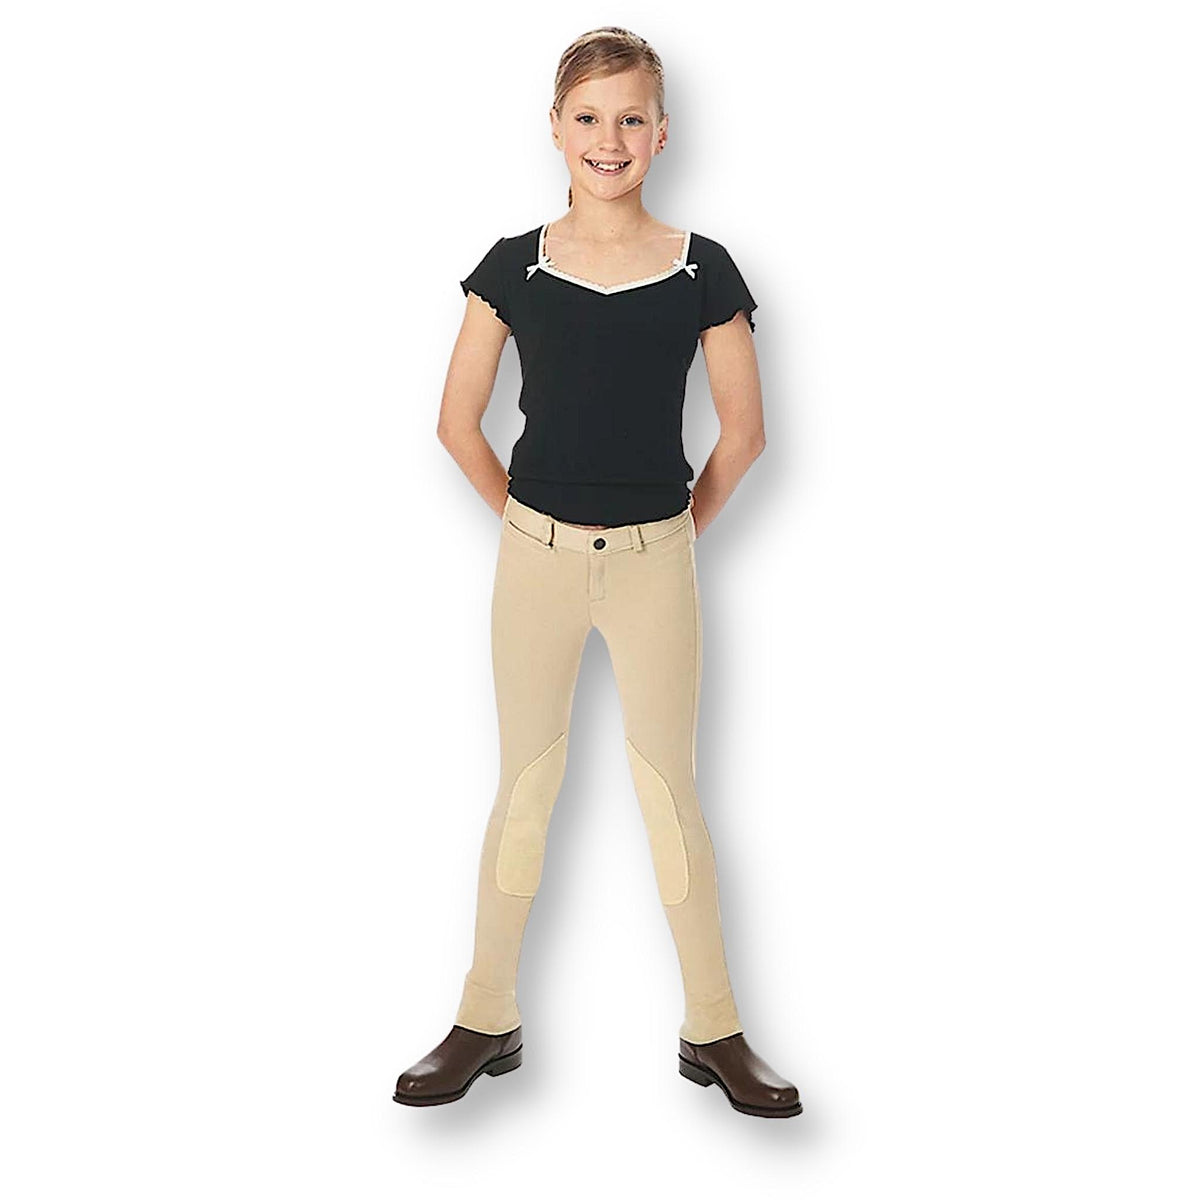 Girl wearing black top with beige jodhpurs and brown boots.